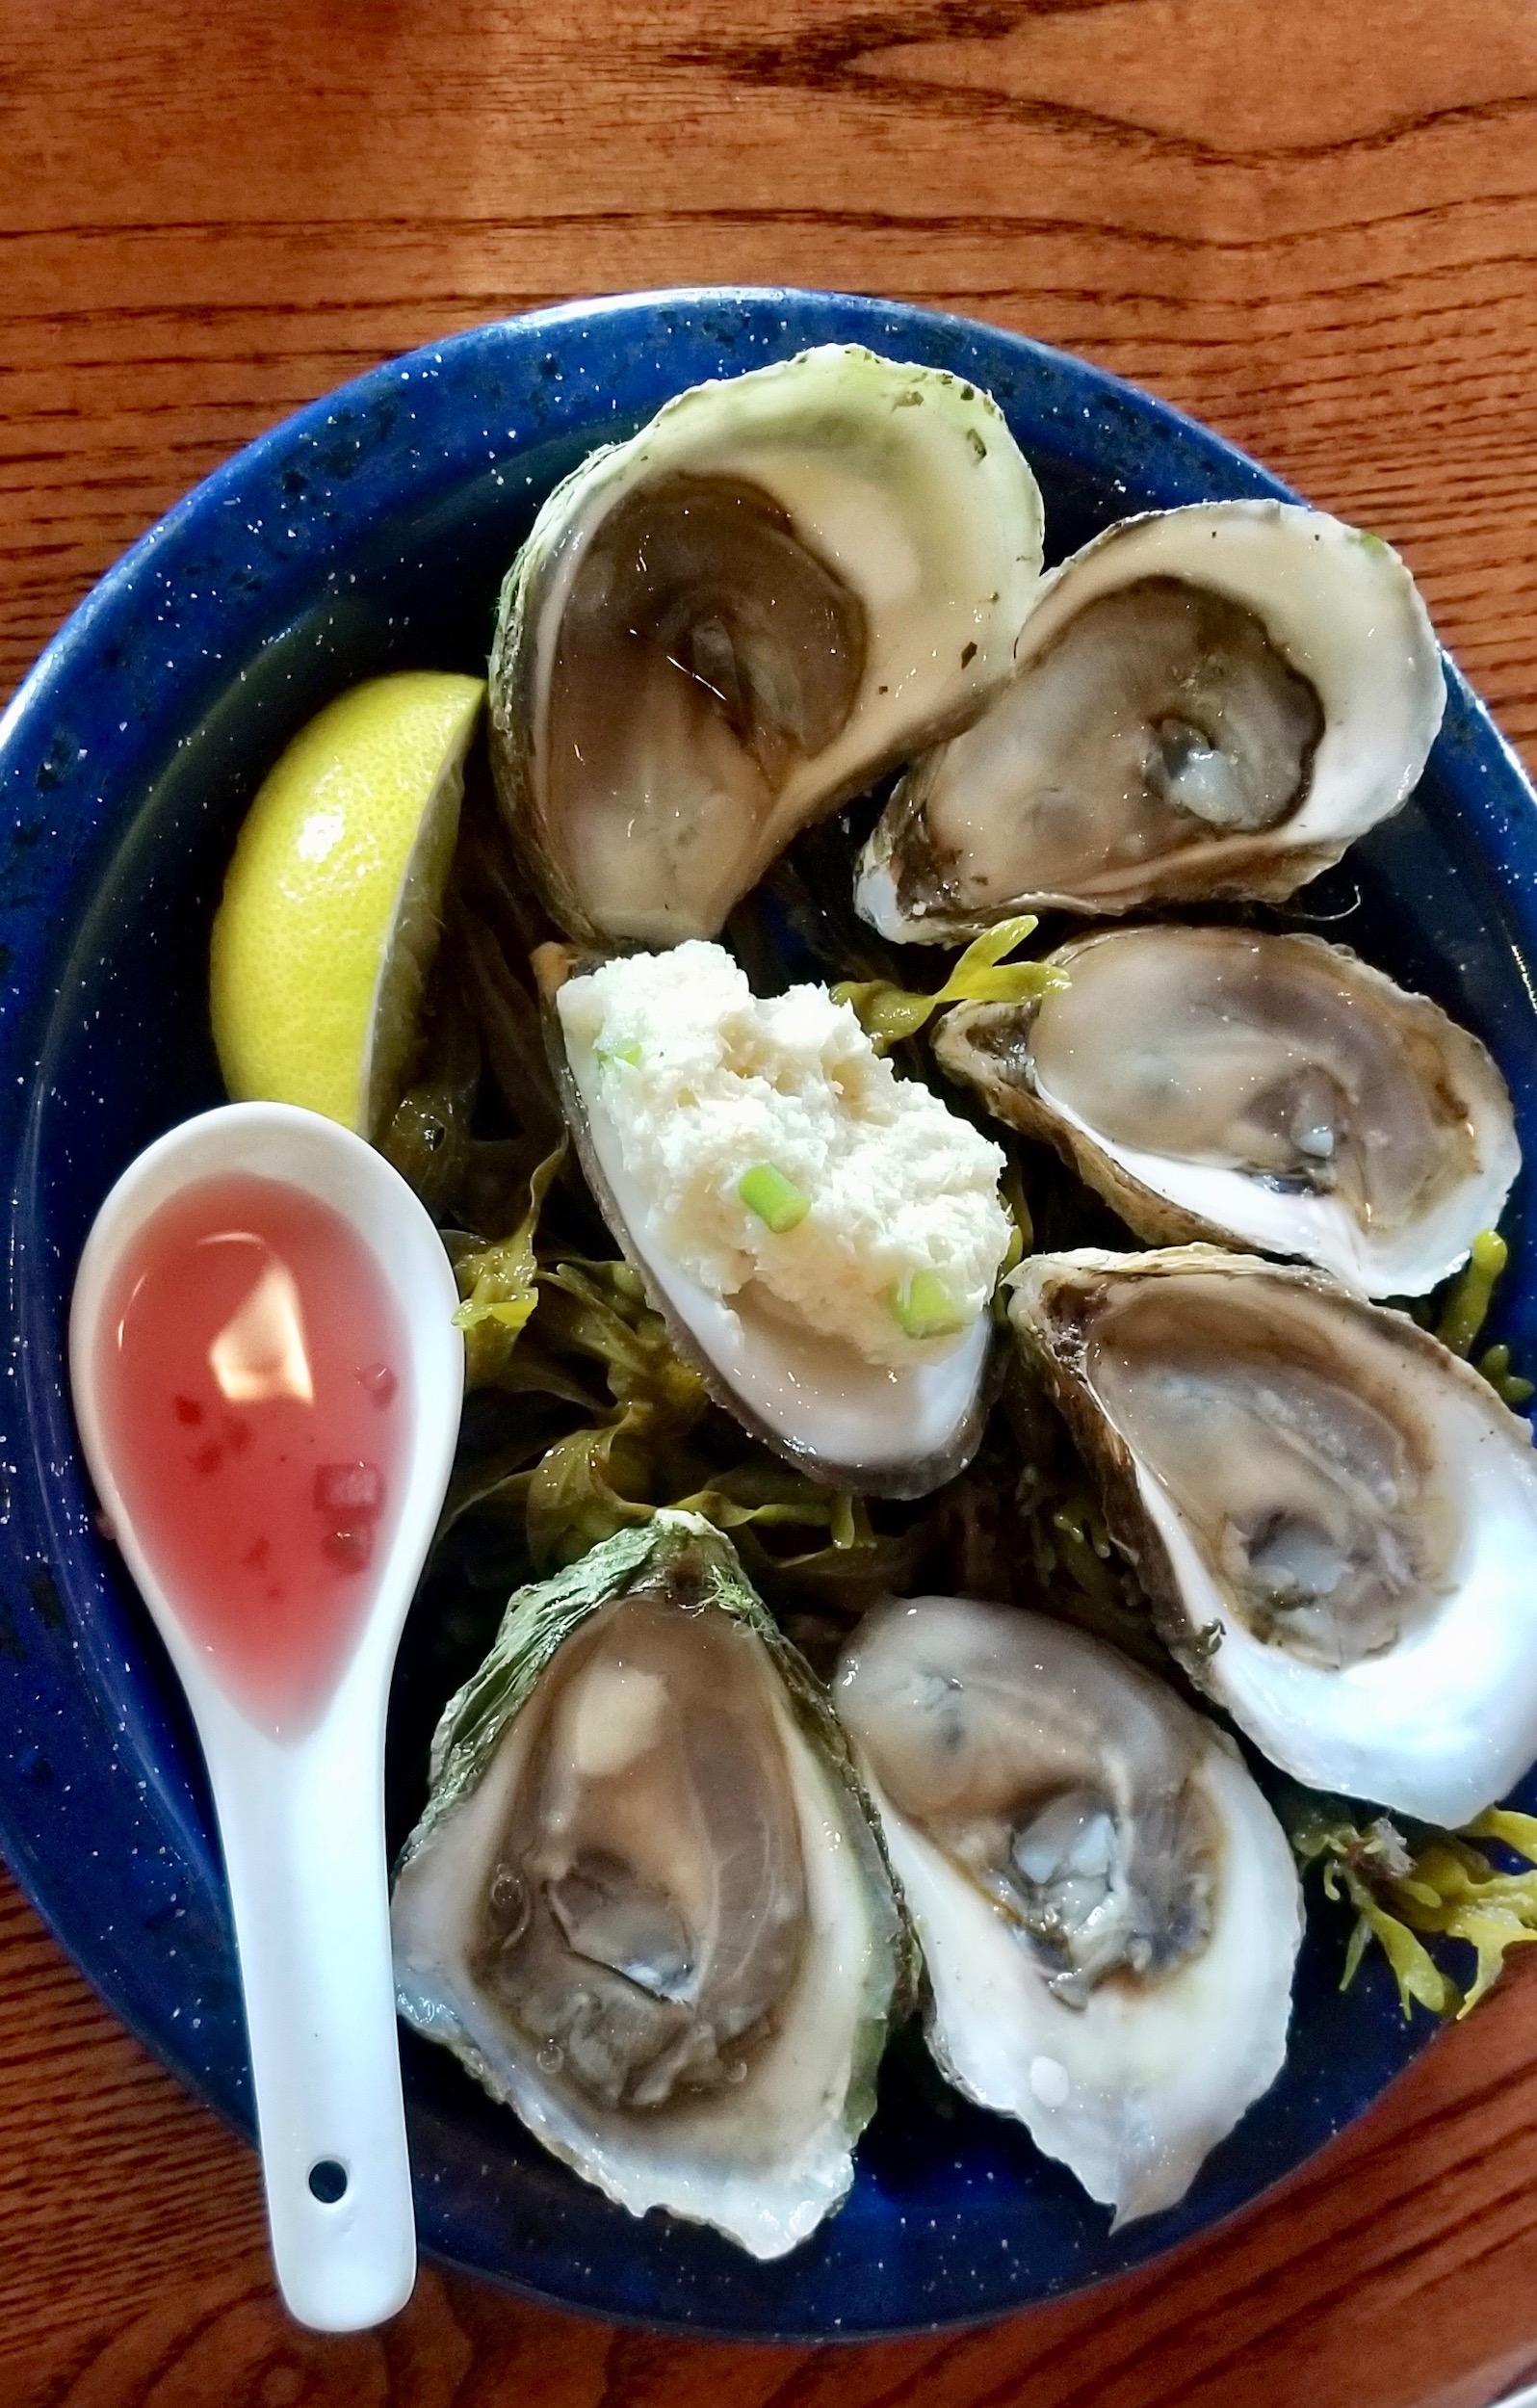 Pinette River Oysters, Point Prim Chowder House